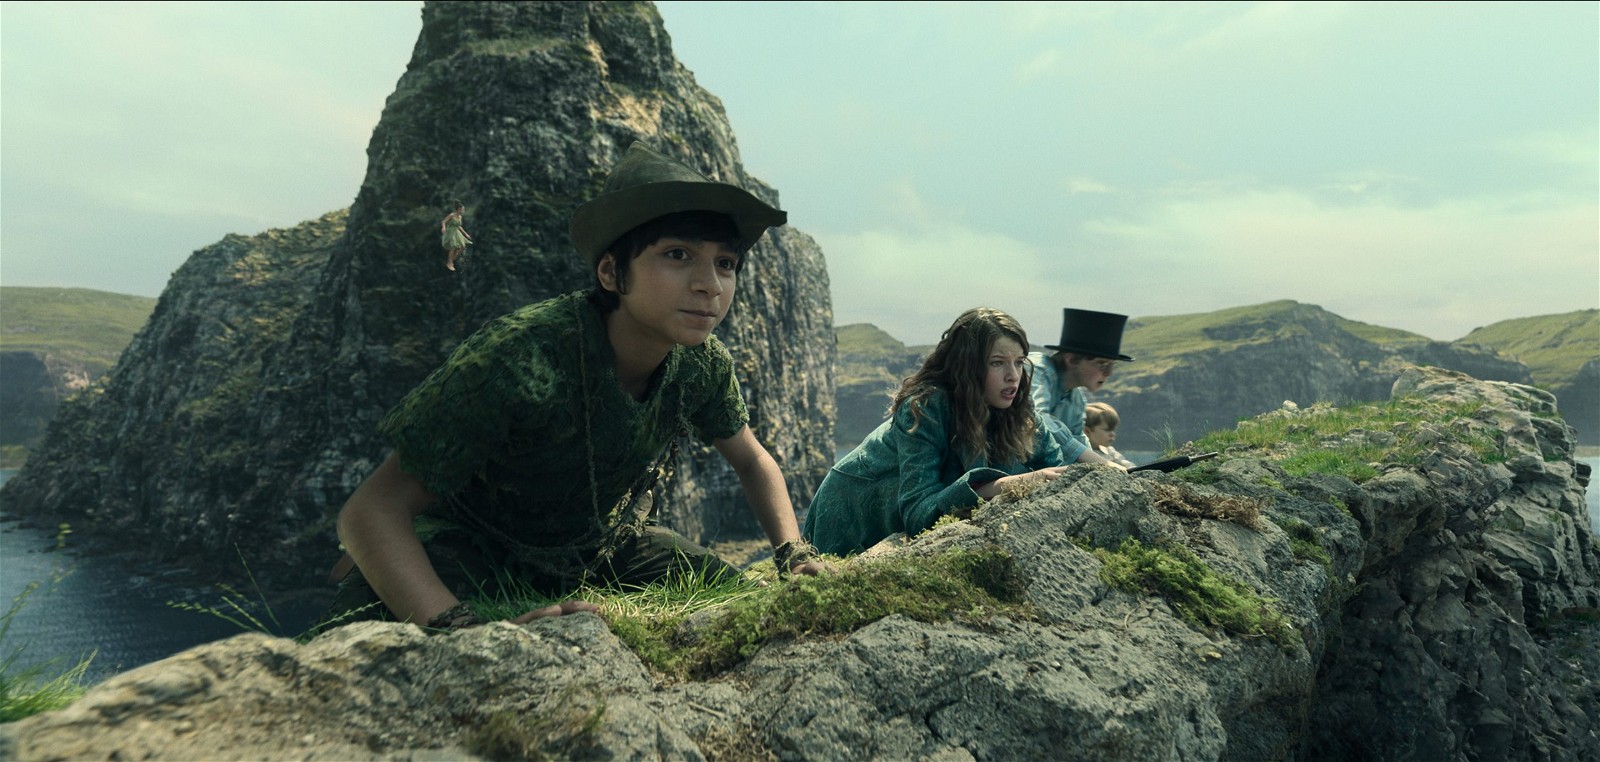 (L-R): Alexander Molony as Peter Pan, Ever Anderson as Wendy, Joshua Pickering as John Darling and Jacobi Jupe as Michael Darling in Disney's live-action PETER PAN &amp; WENDY, exclusively on Disney+. Photo courtesy of Disney. © 2023 Disney Enterprises, Inc. All Rights Reserved.